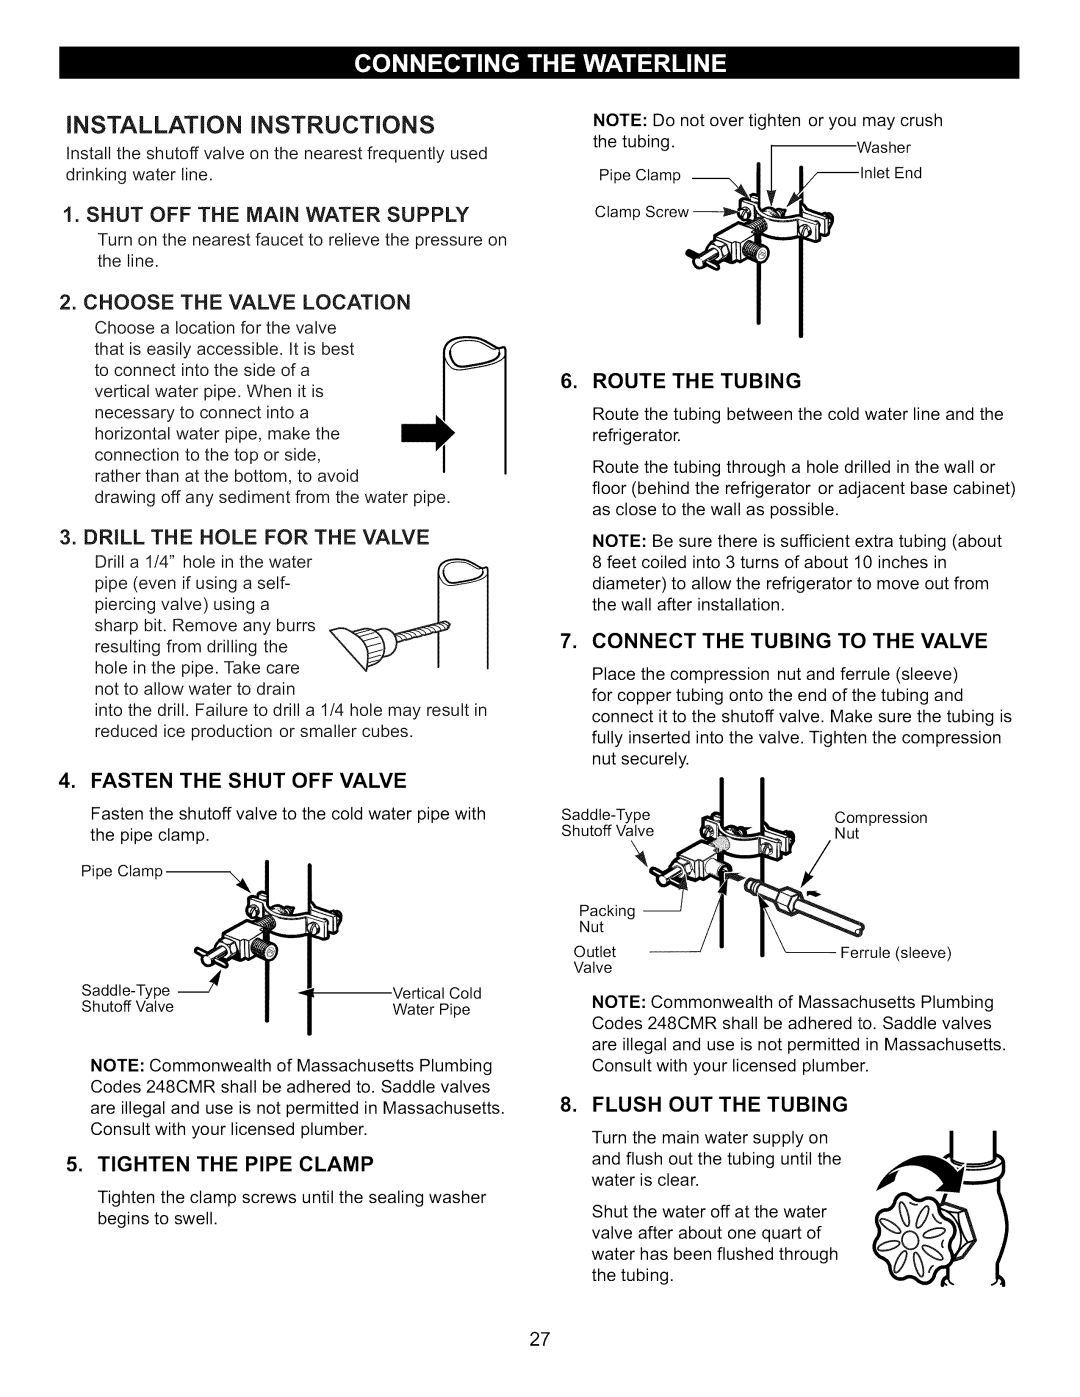 Kenmore 795.7130-K iNSTALLATiON iNSTRUCTiONS, Shut Off The Main Water Supply, Choose The Valve Location, Route The Tubing 